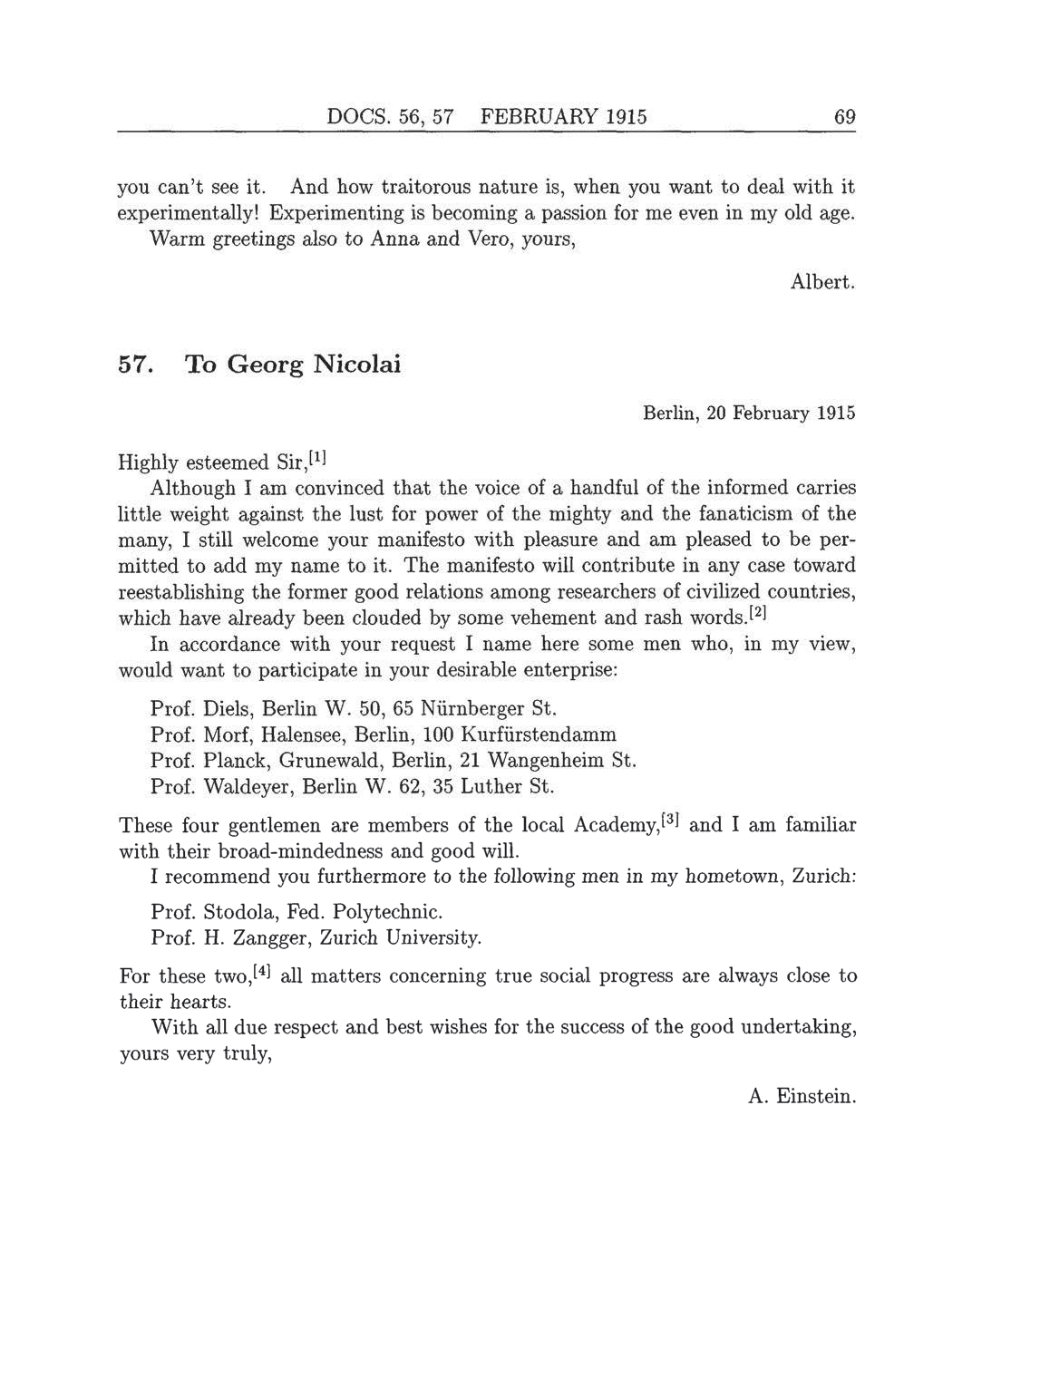 Volume 8: The Berlin Years: Correspondence, 1914-1918 (English translation supplement) page 69